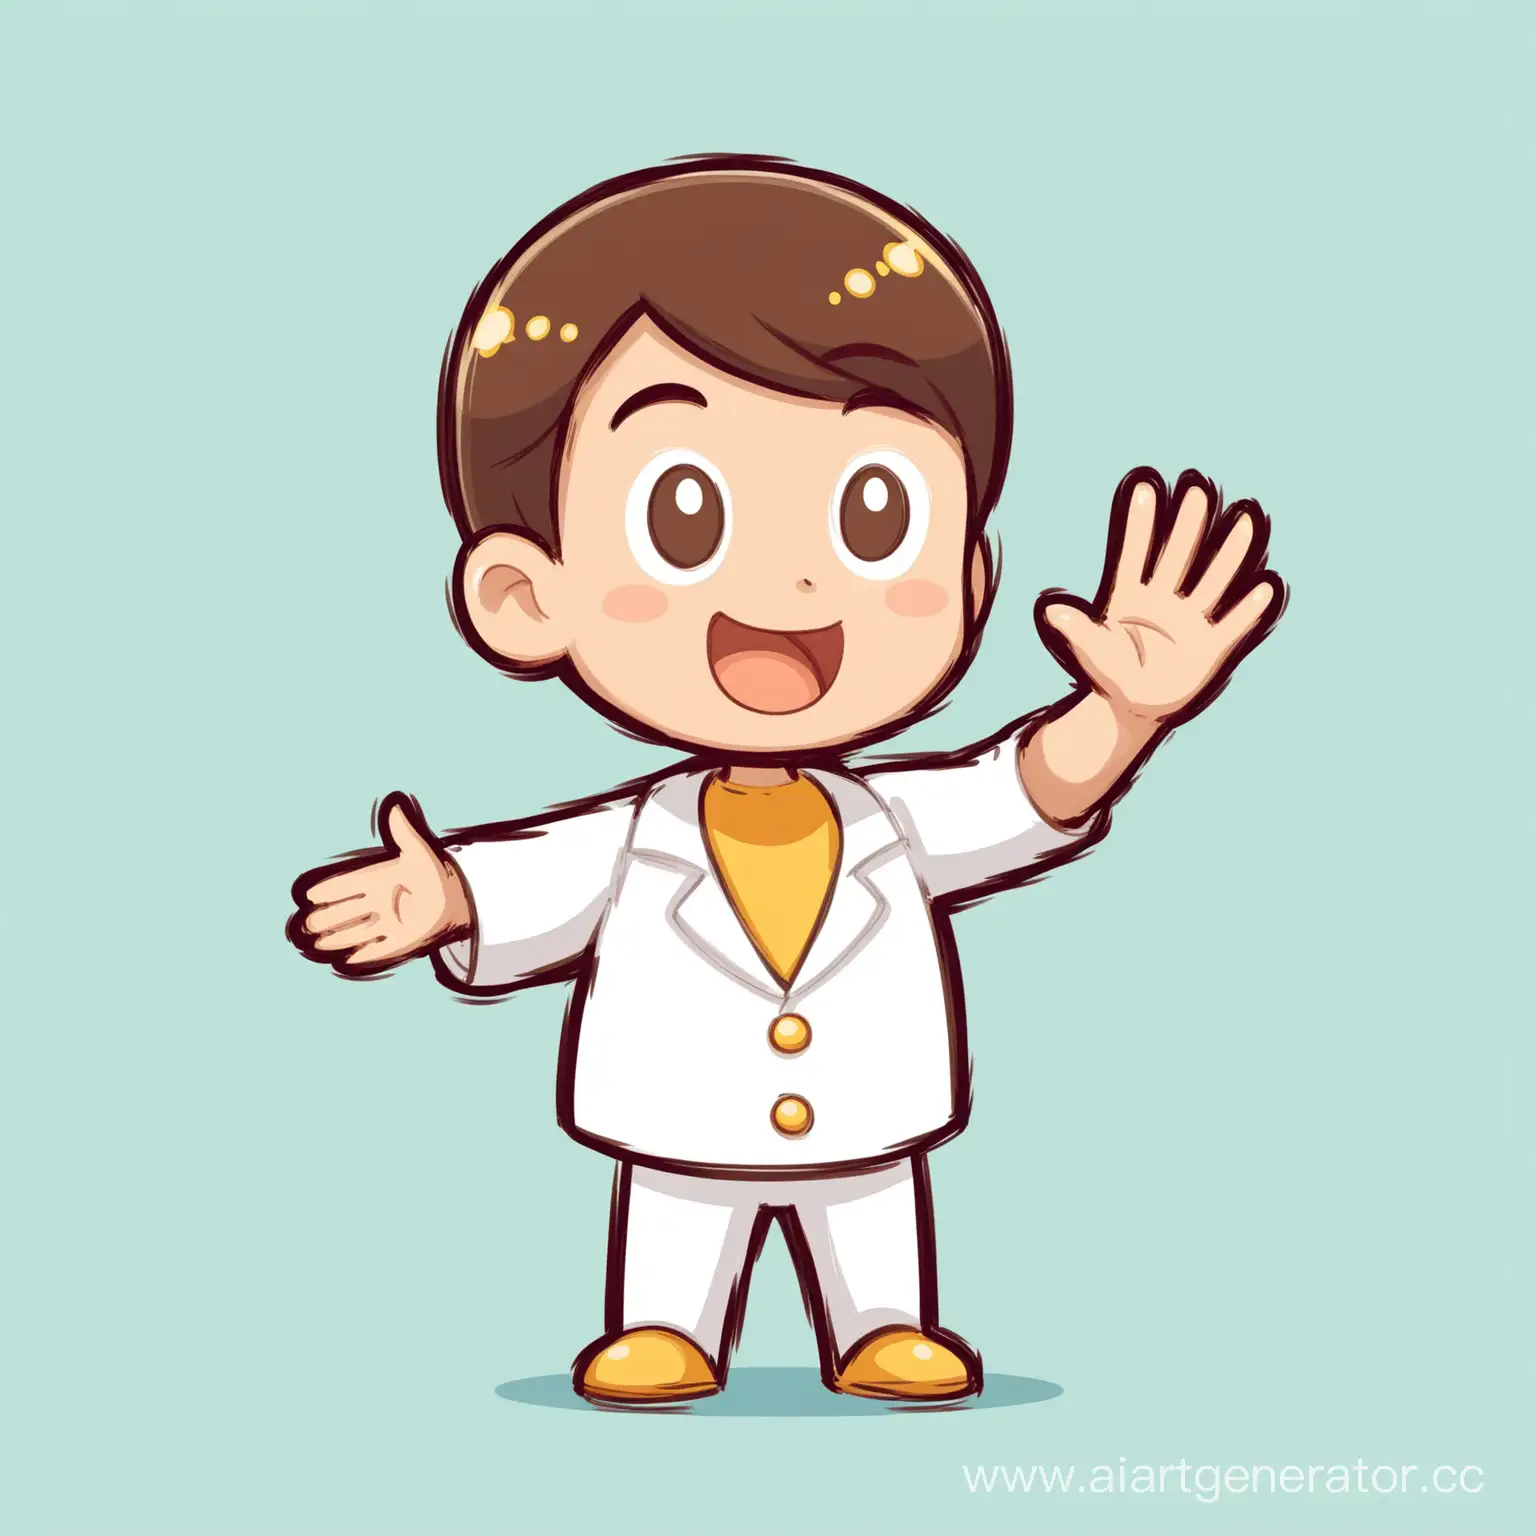 Friendly-Cartoon-Character-Waving-on-White-Background